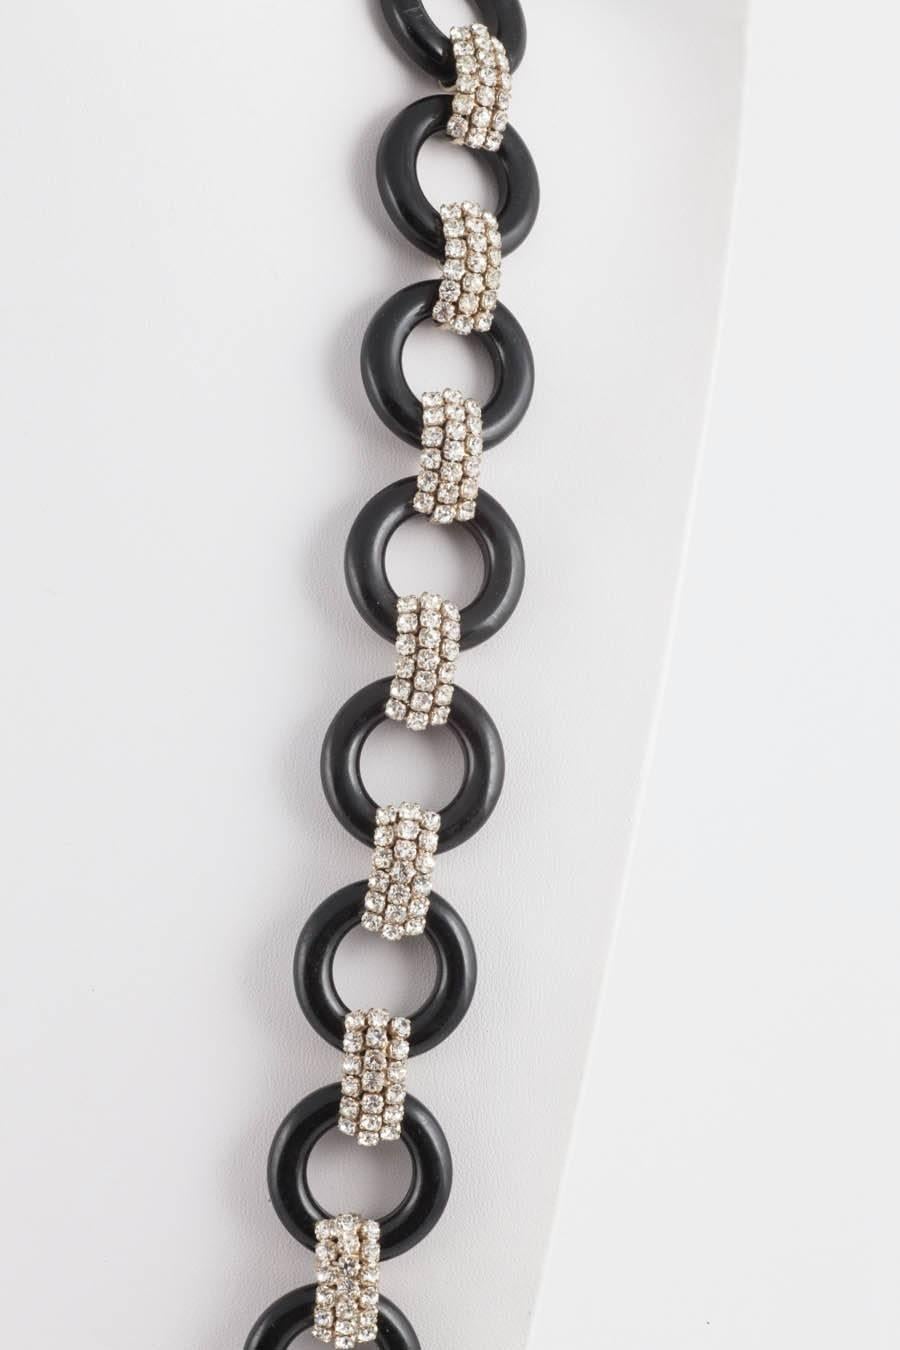 A long continuous row of plastic circles and paste connecting pieces create this very smart necklace, made in the Art Deco style, from the 1970s, a period when style and designers looked back to the 1930s for inspiration and in admiration. Of